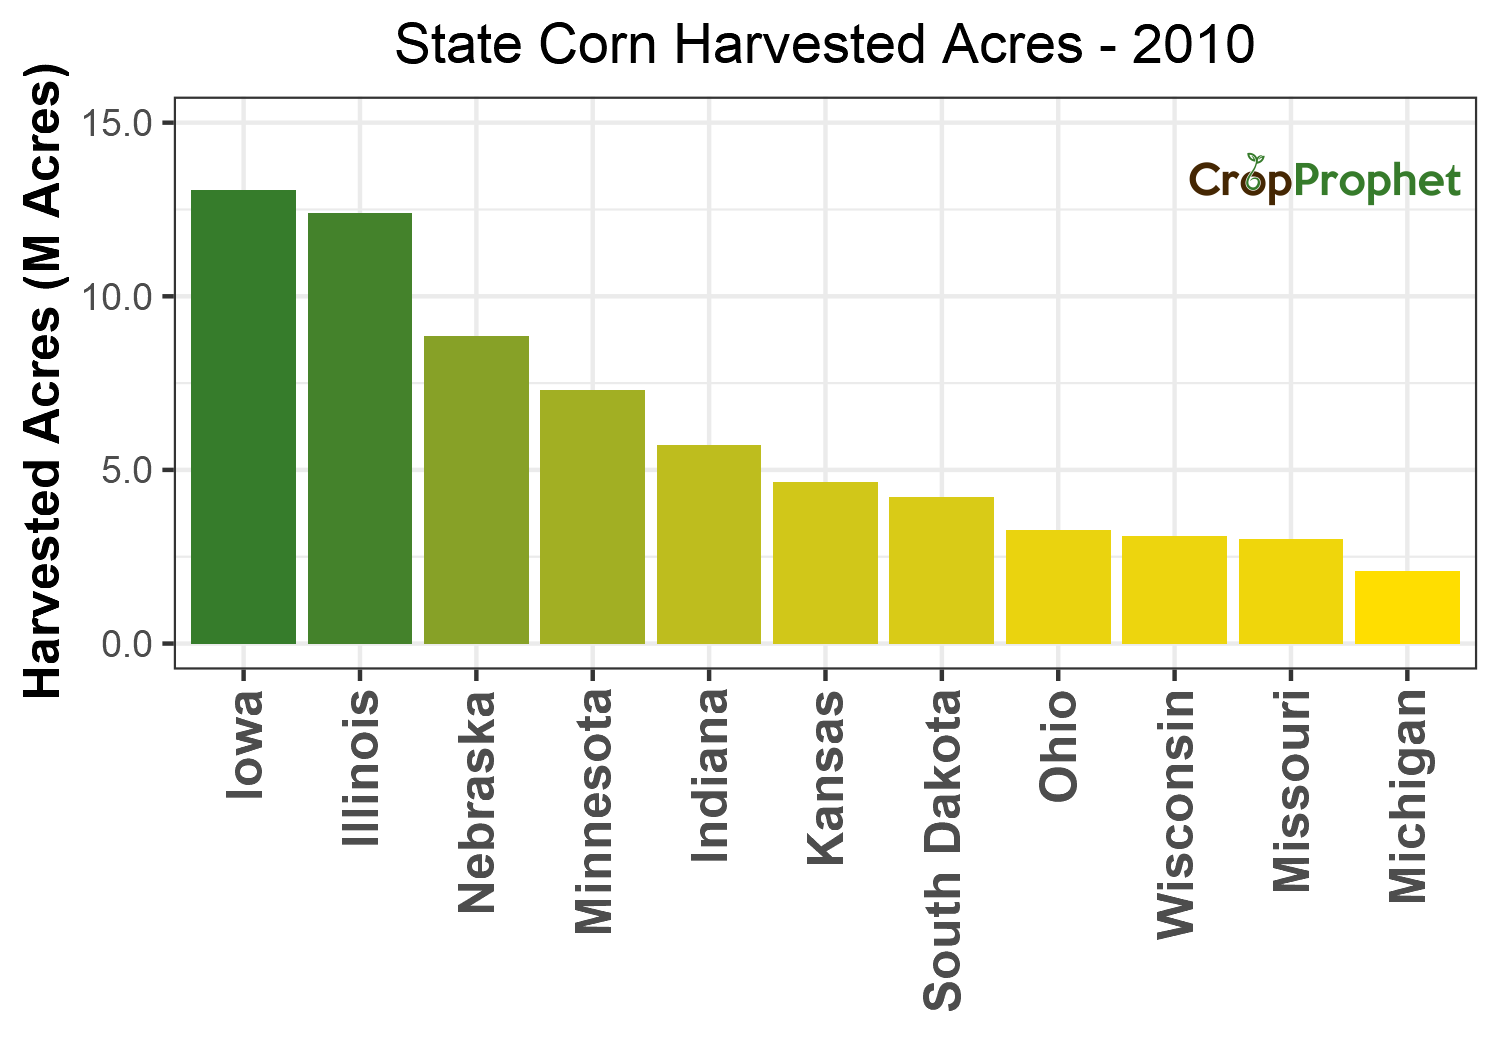 Corn Harvested Acres by State - 2010 Rankings